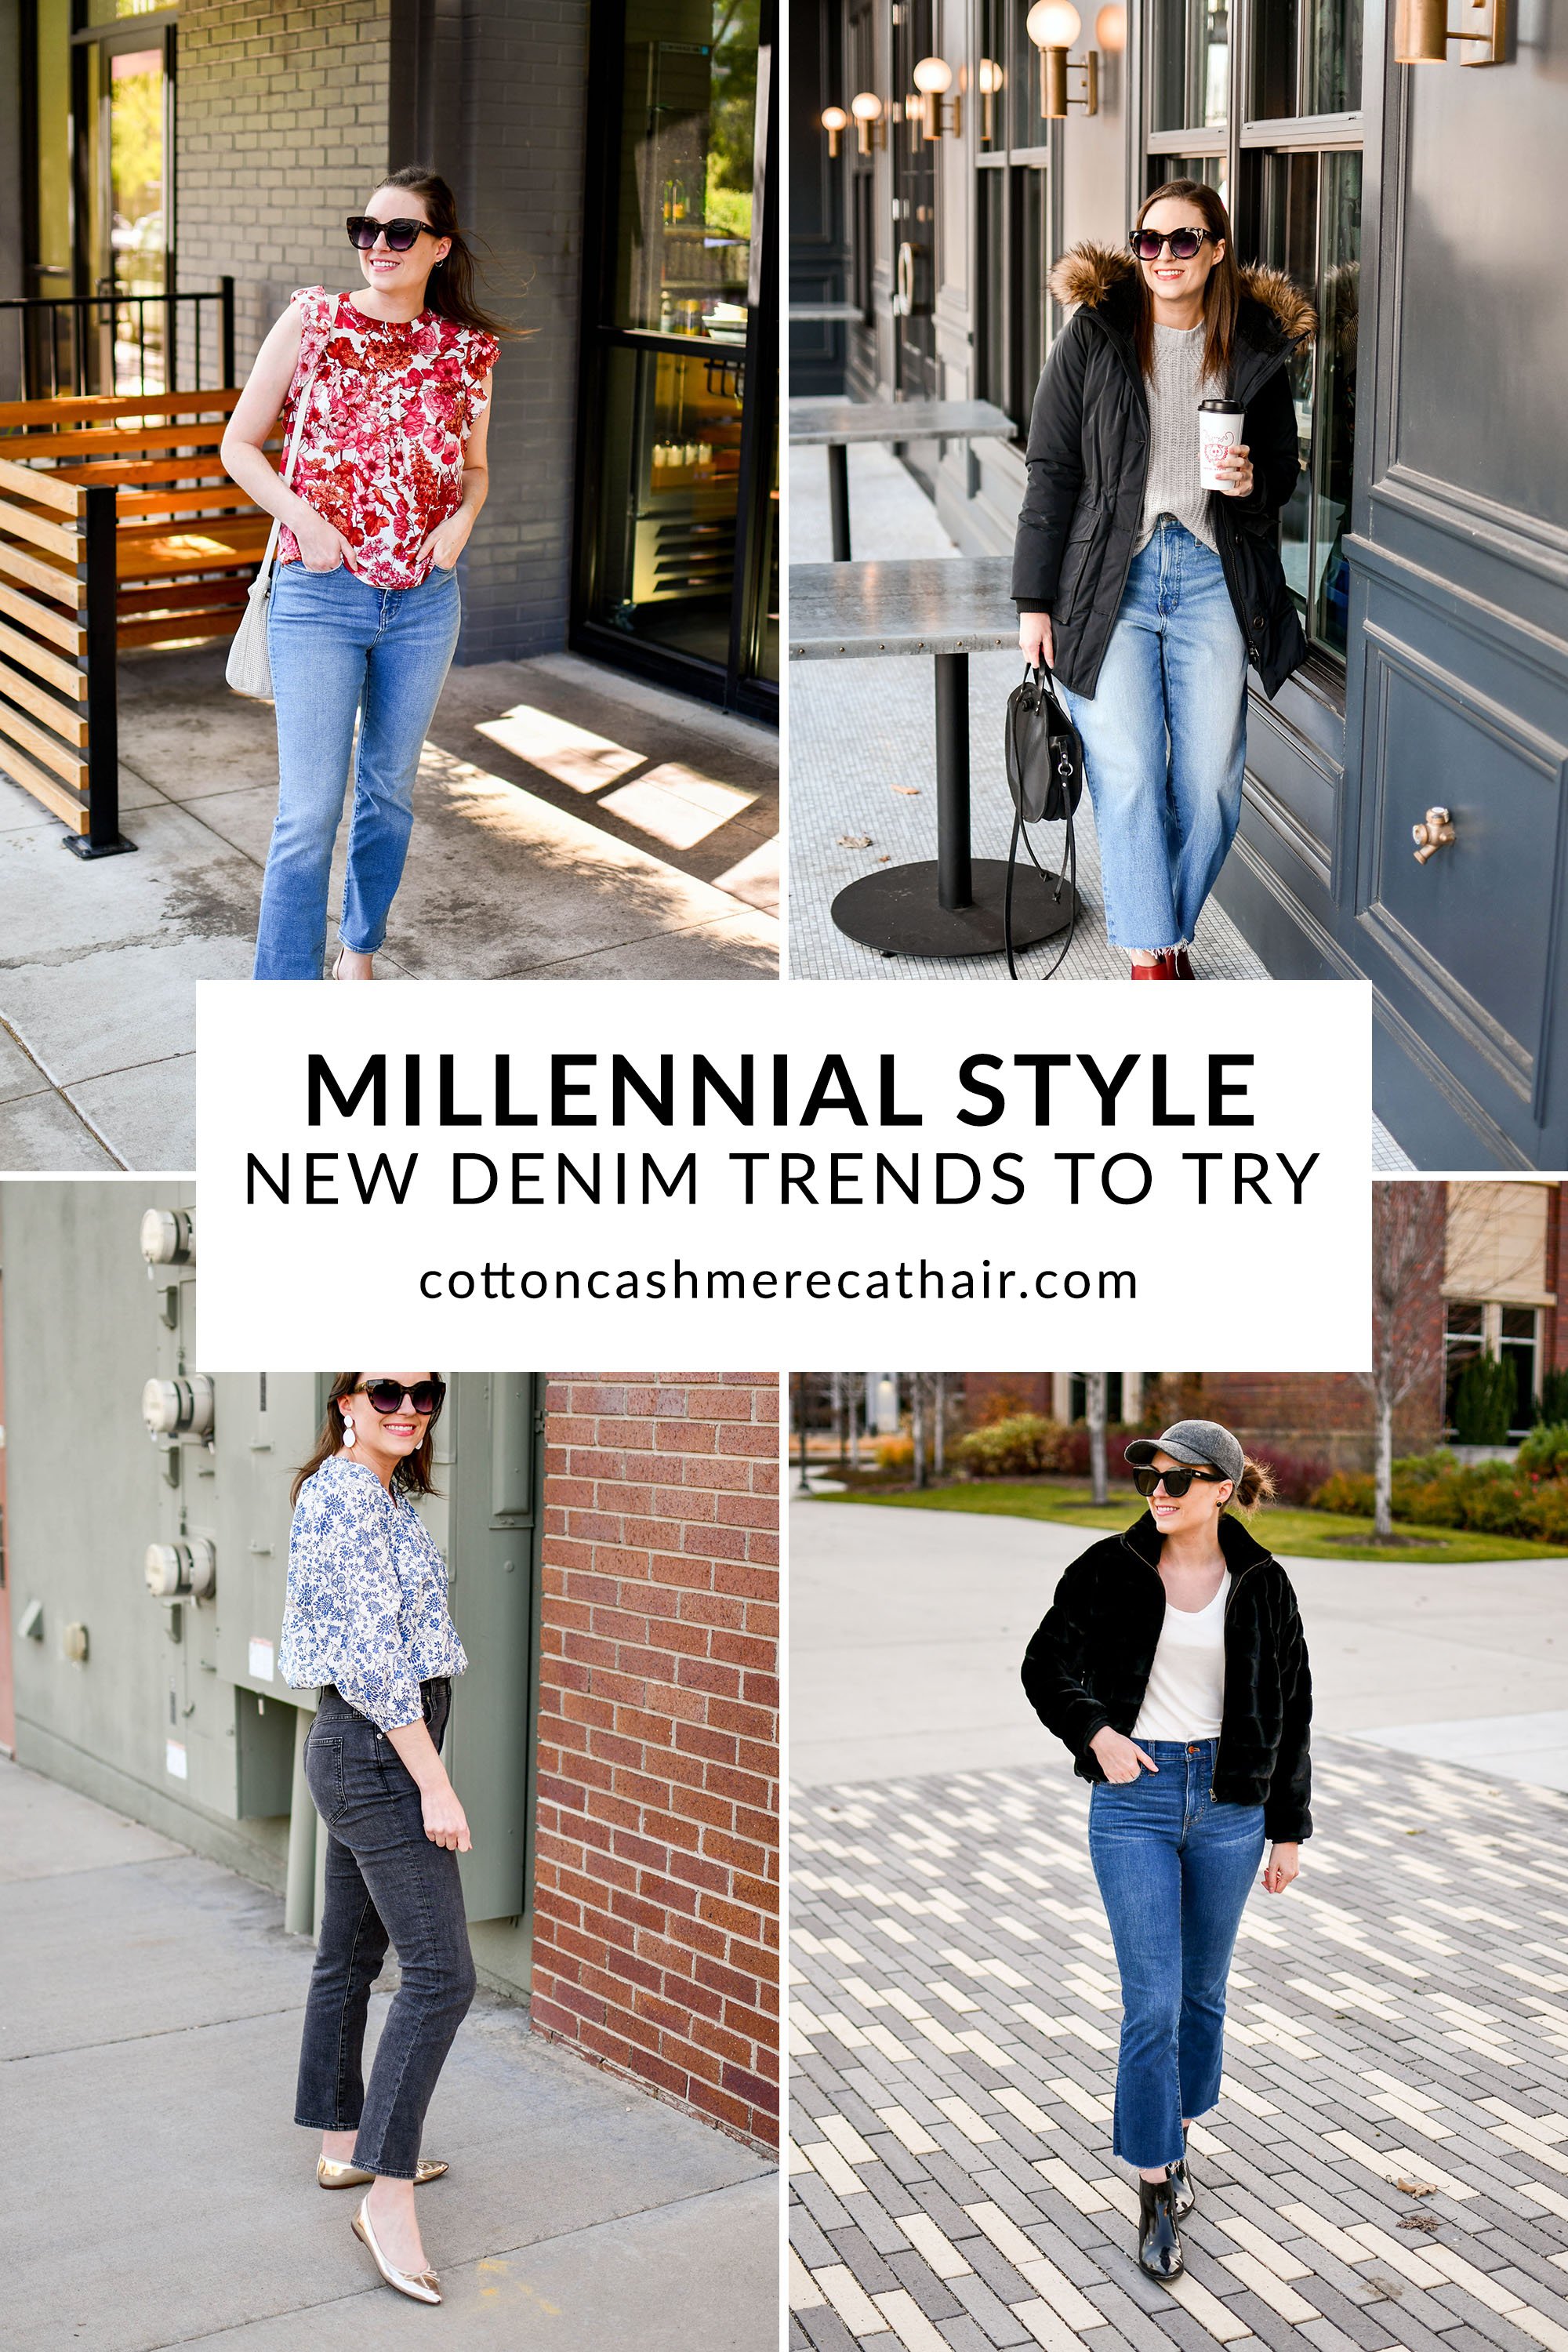 Millennial Style: 6 New Denim Trends to Try